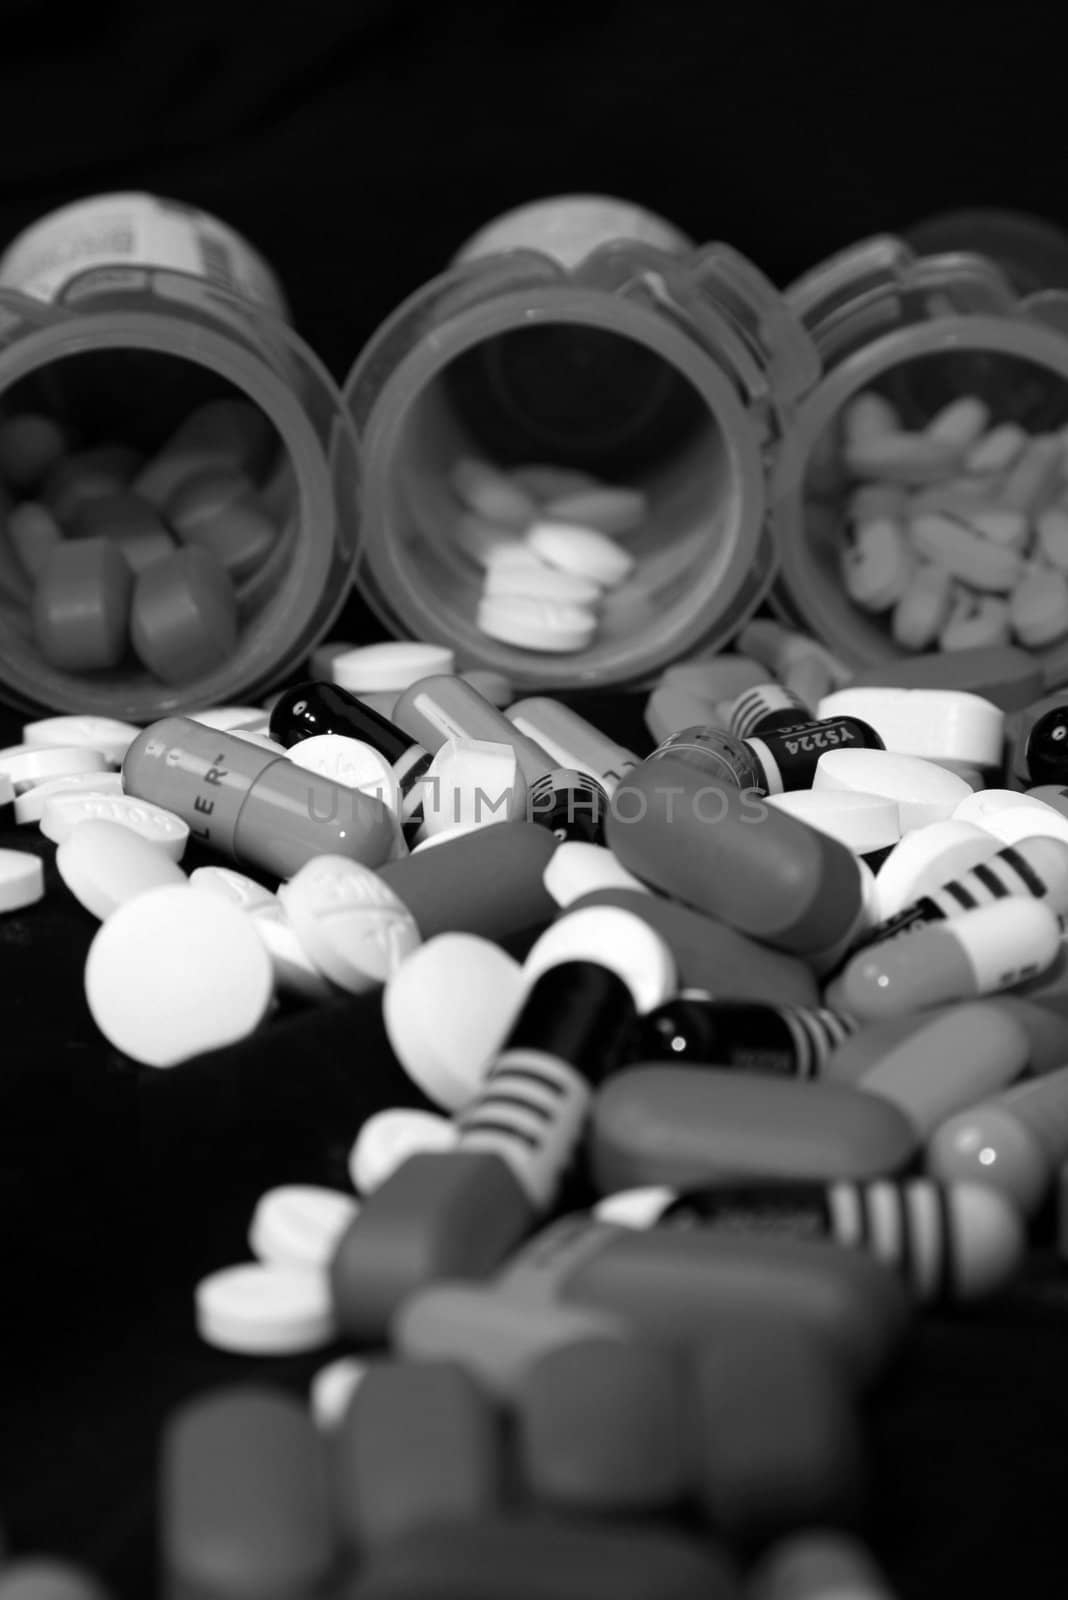 Drugs, prescriptions medicines, pills, and bottles pouring out onto black background